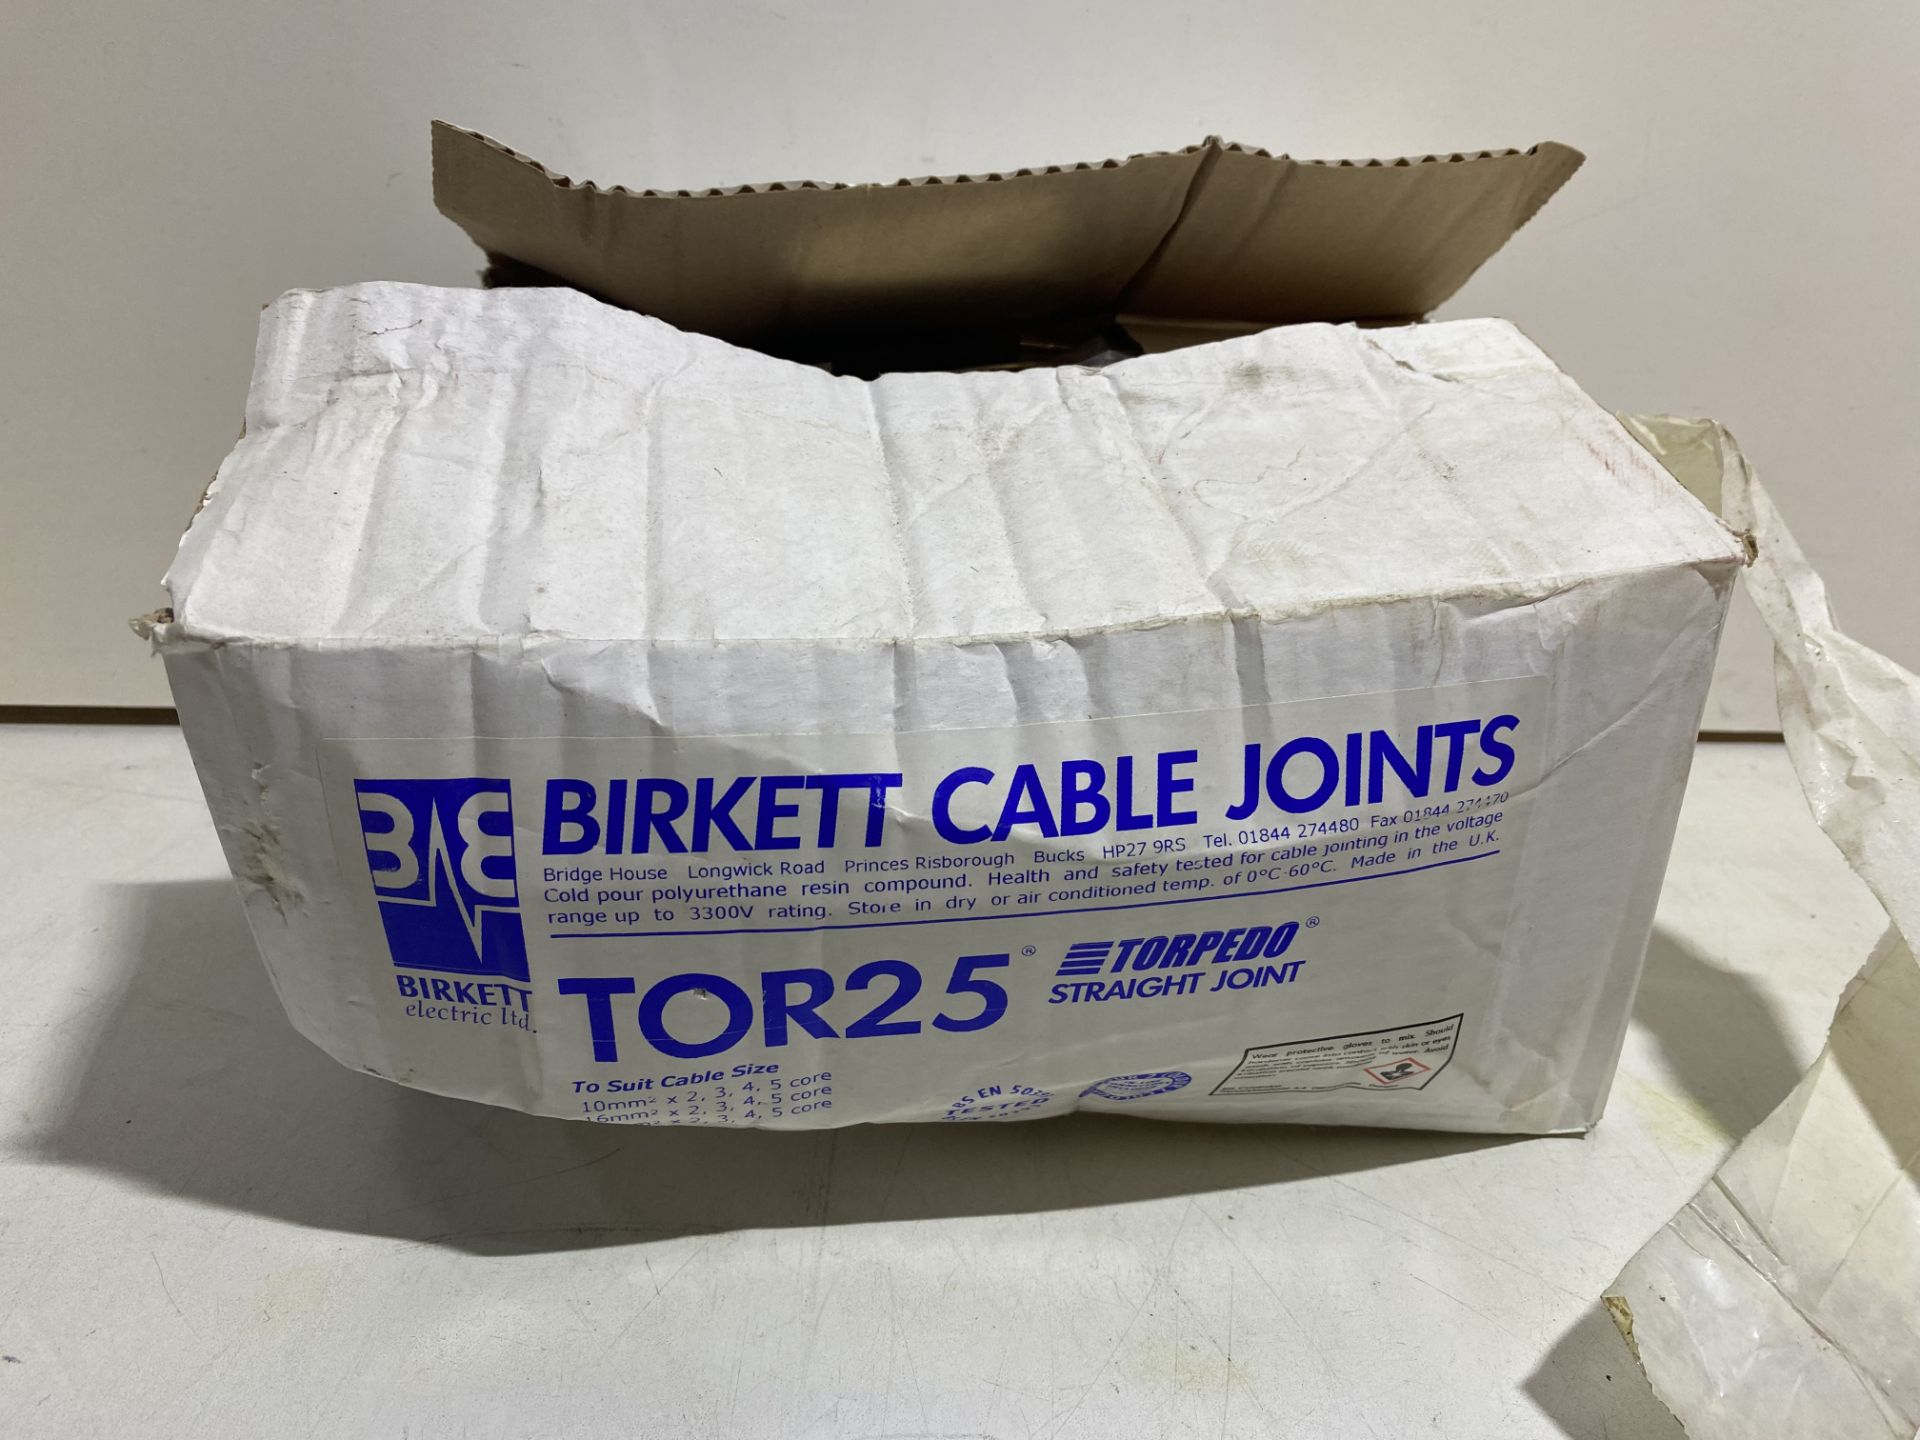 3 x Various Cable Jointing Kits As Seen In Photos - Image 8 of 9